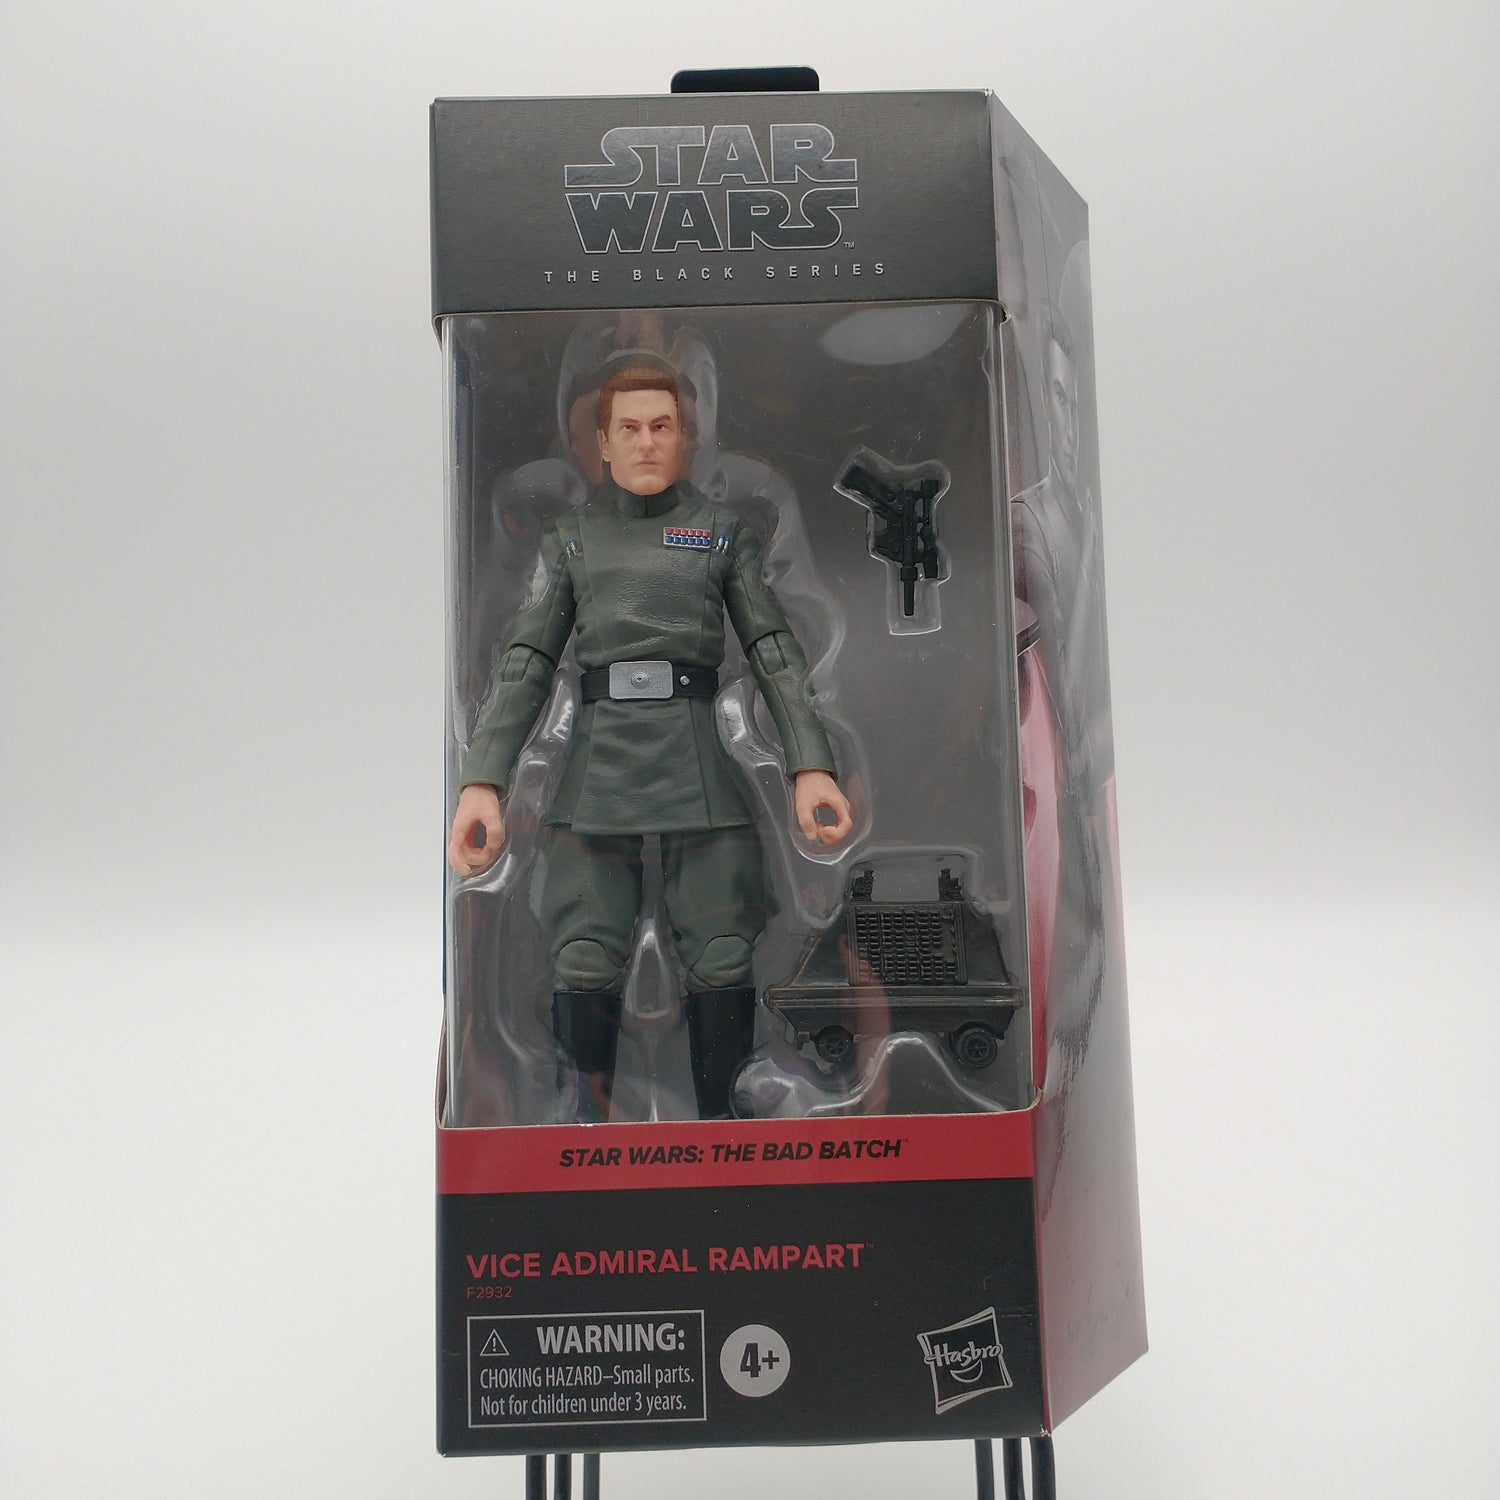 The front of the cart has the action figure inside the bubble along with a weapon and a mouse droid.